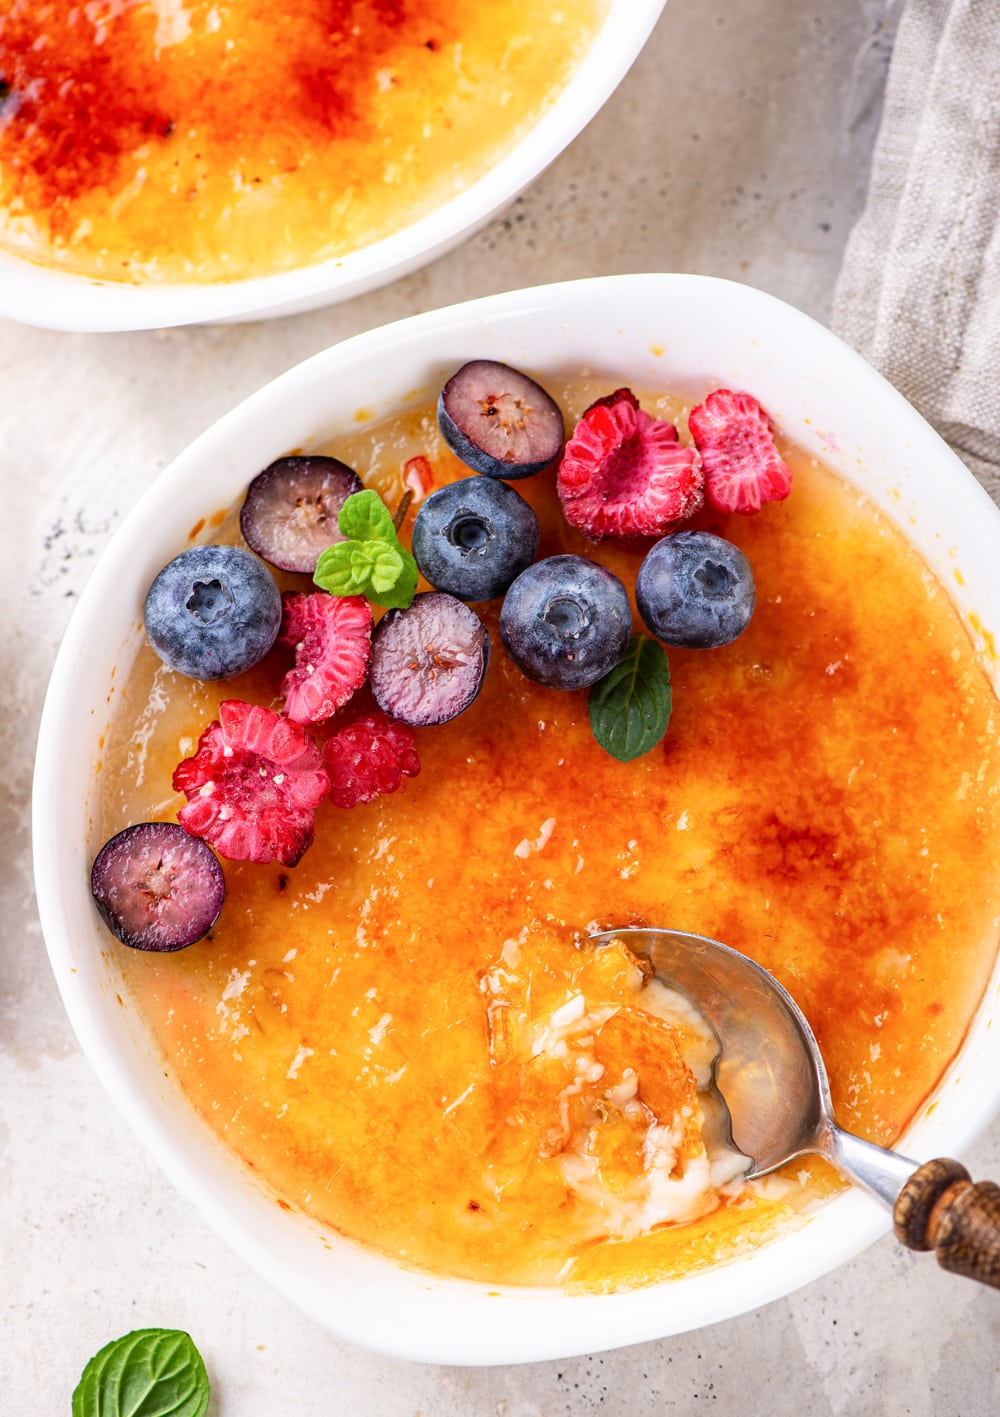 An overhead view of vegan creme brulee in a ramekin. There are sliced raspberries and blueberries at the back half of the vegan creme brulee. A spoon is scooping in to the vegan creme brulee at the front of the ramekin. The ramekin is set on a white counter.